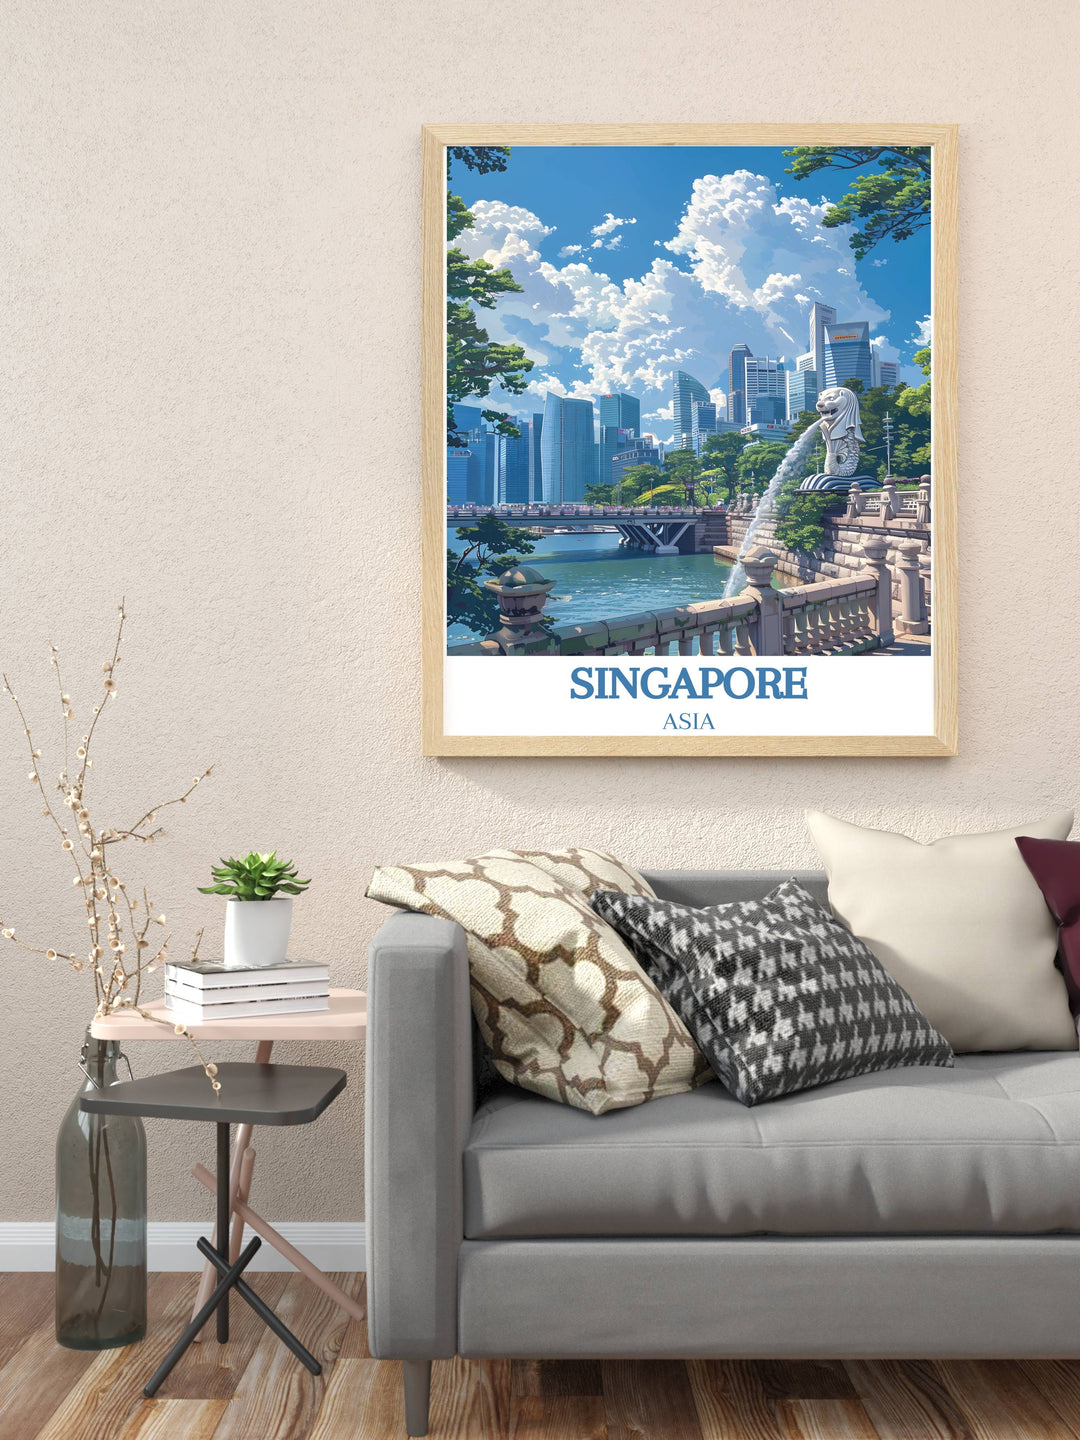 Merlion Park Wall Art offering stunning views and intricate details, bringing the essence of Singapores cultural heritage and modern achievements into your home.